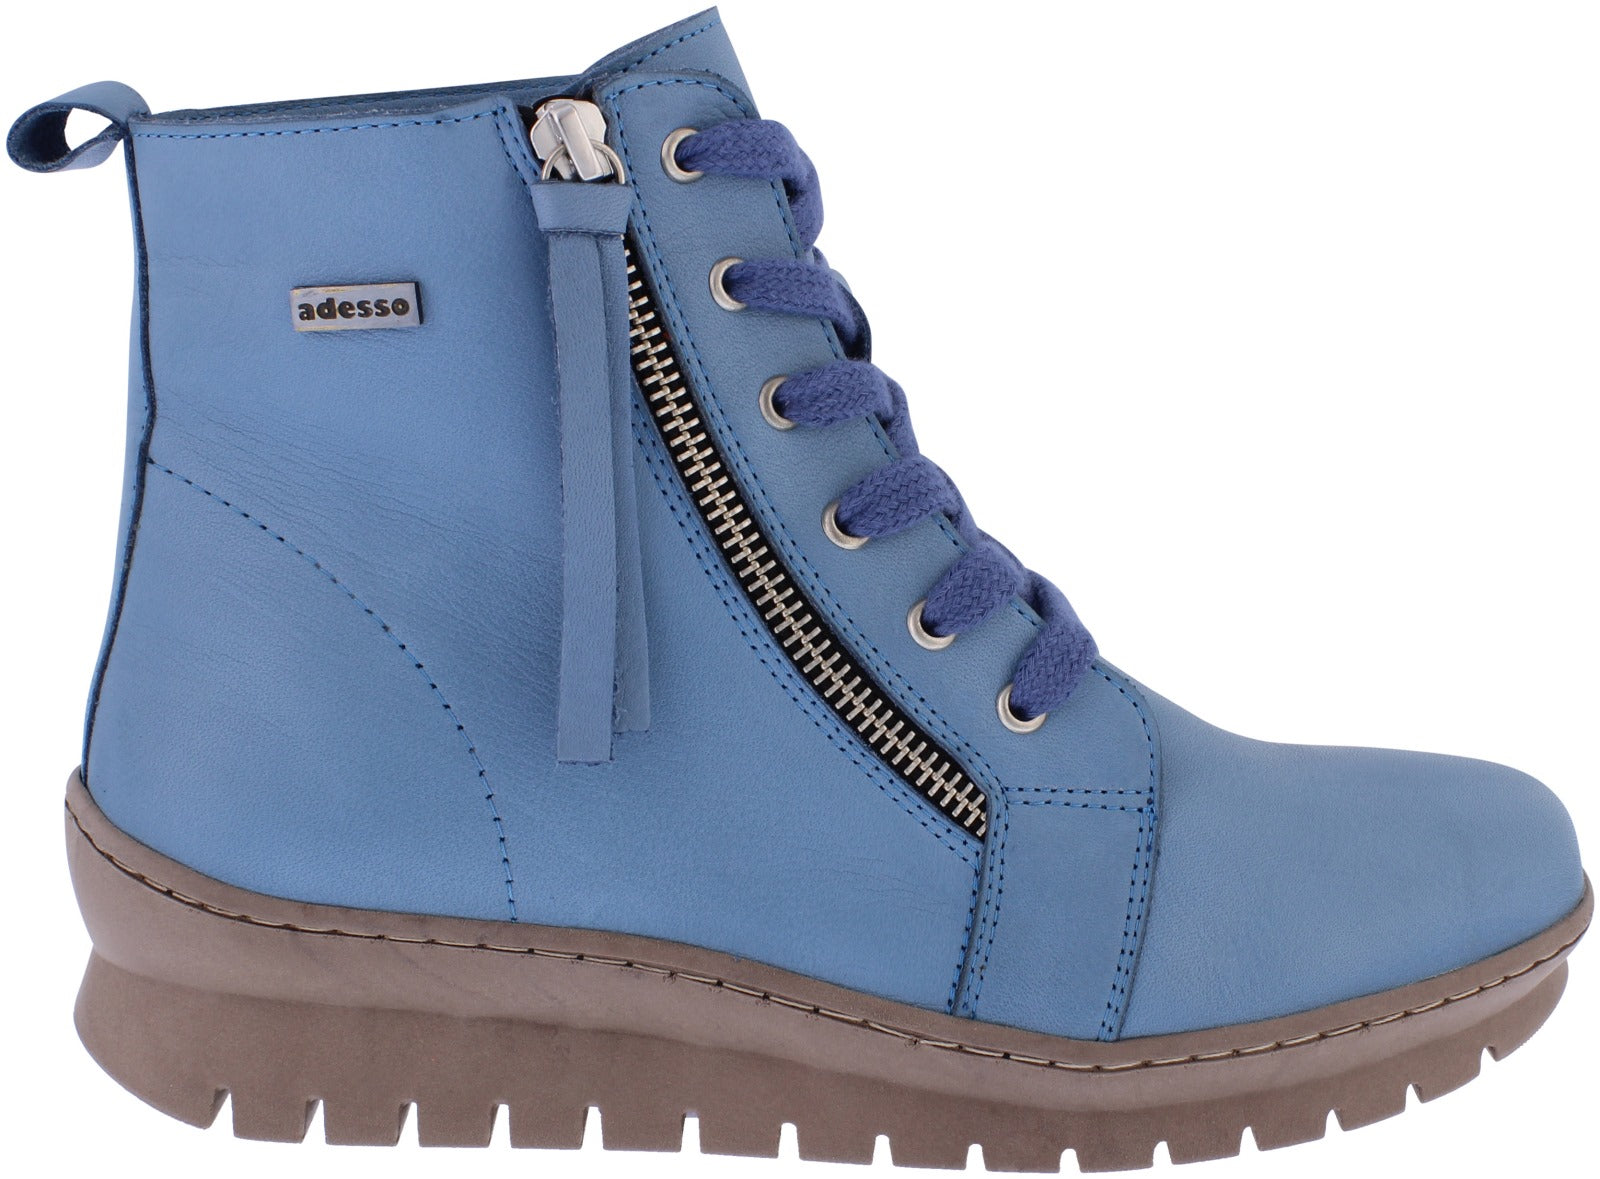 Adesso A7044 Kirsty Ladies Denim Blue Leather Zip & Lace Ankle Boots